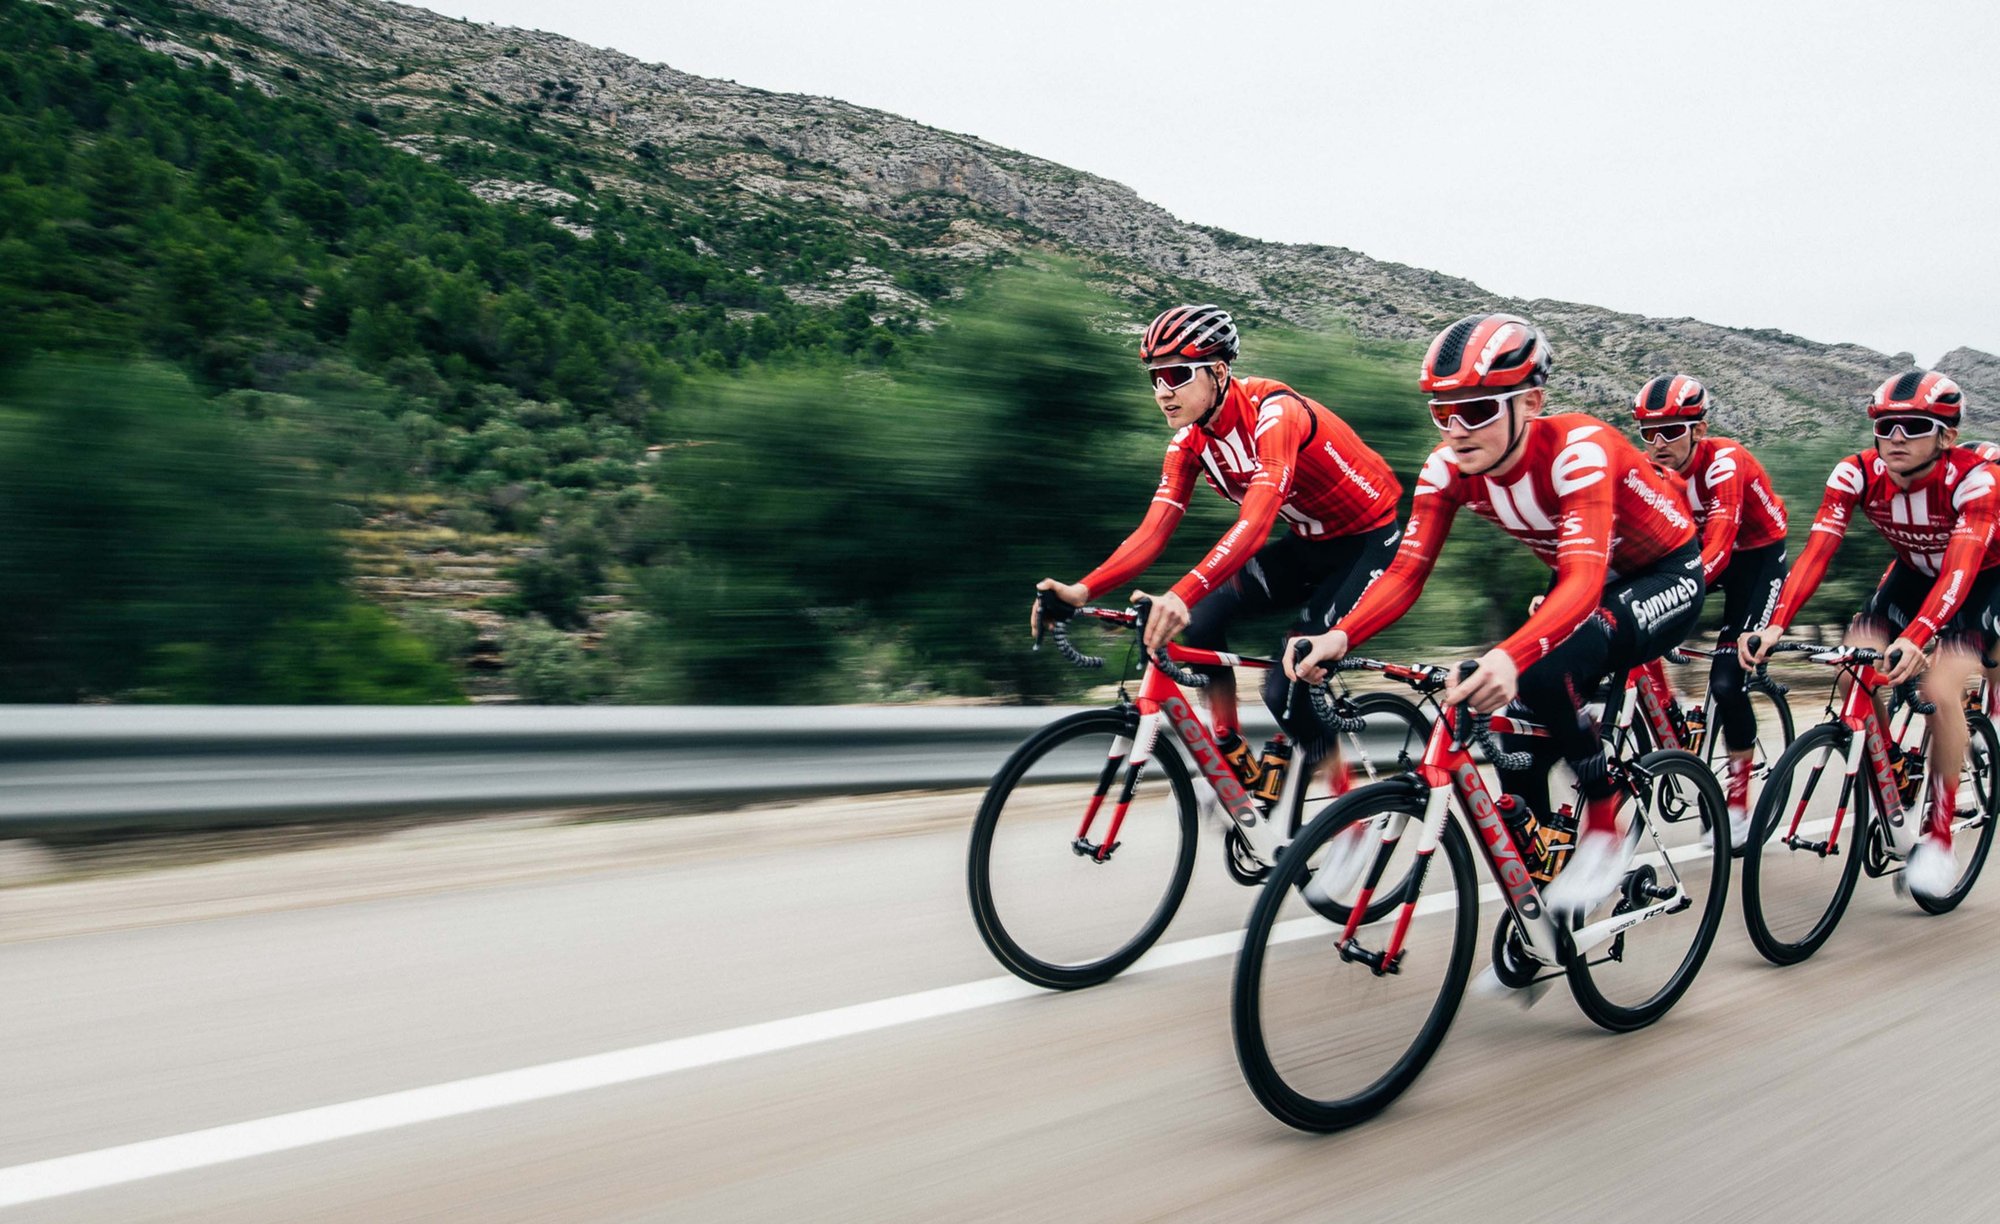 Cyclists Team Sunweb in action with Shimano